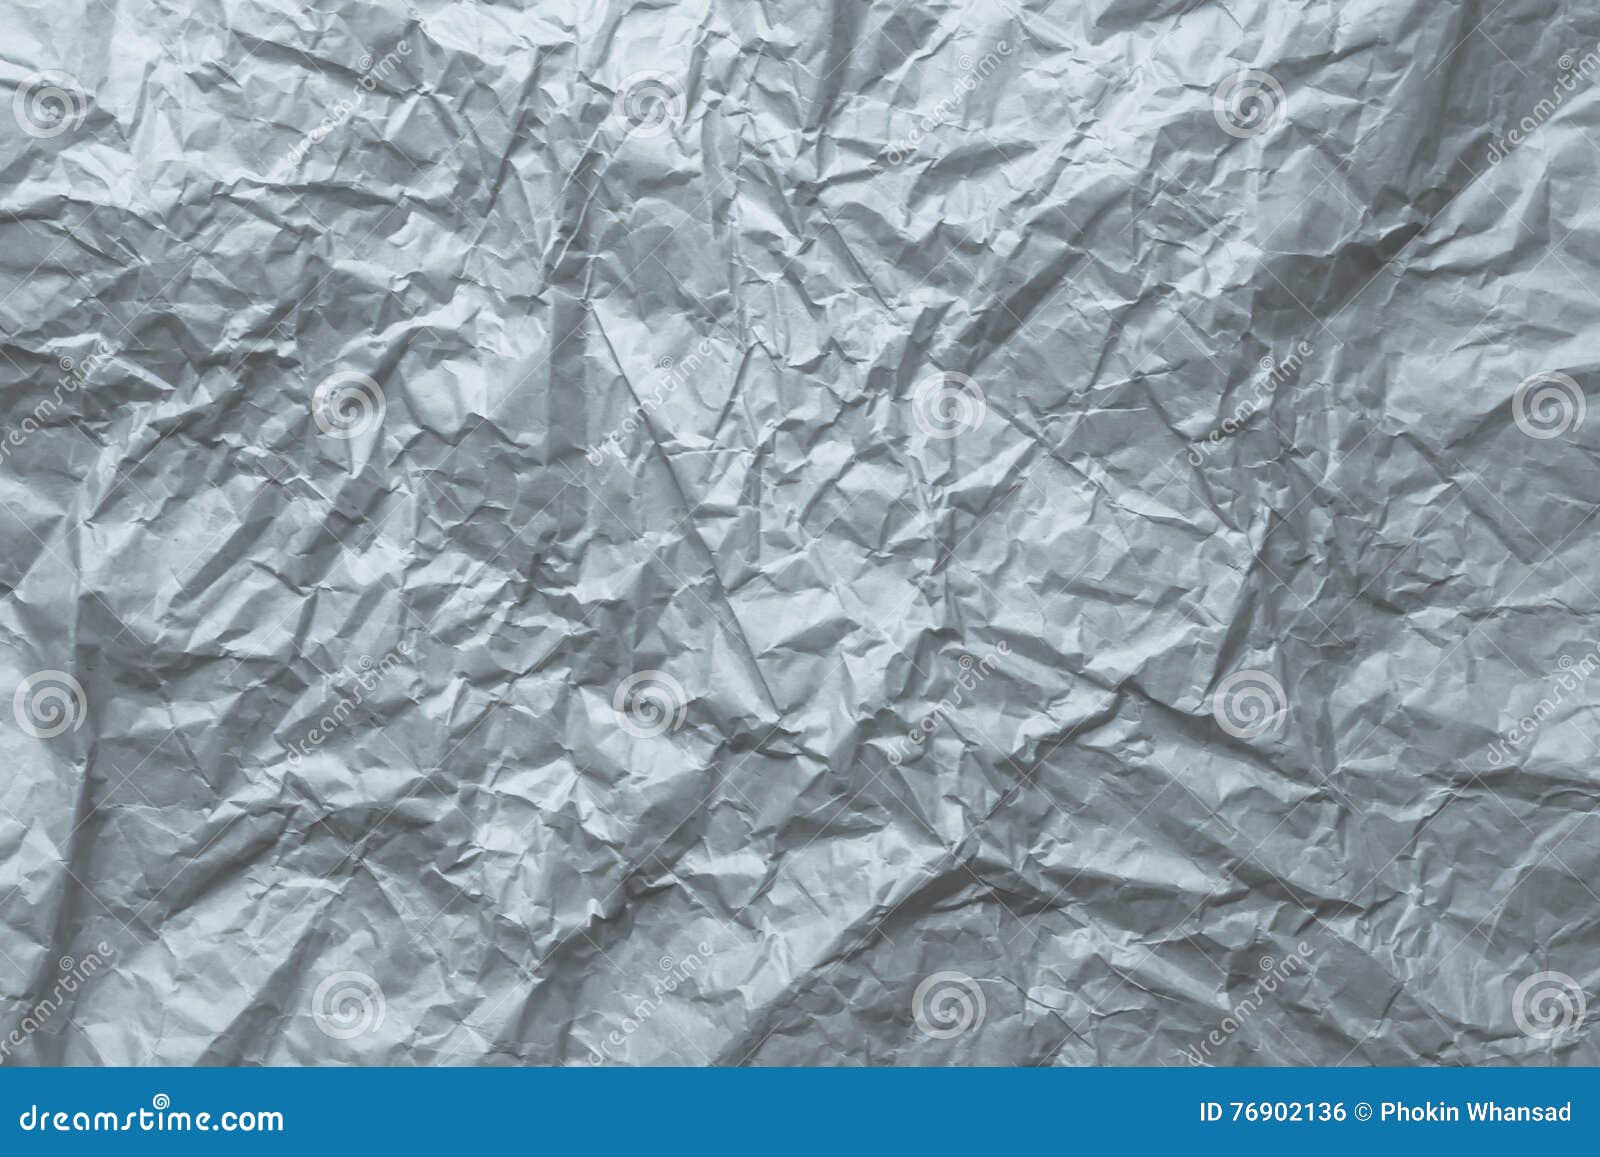 8 2 Texture Newspaper Photos Free Royalty Free Stock Photos From Dreamstime